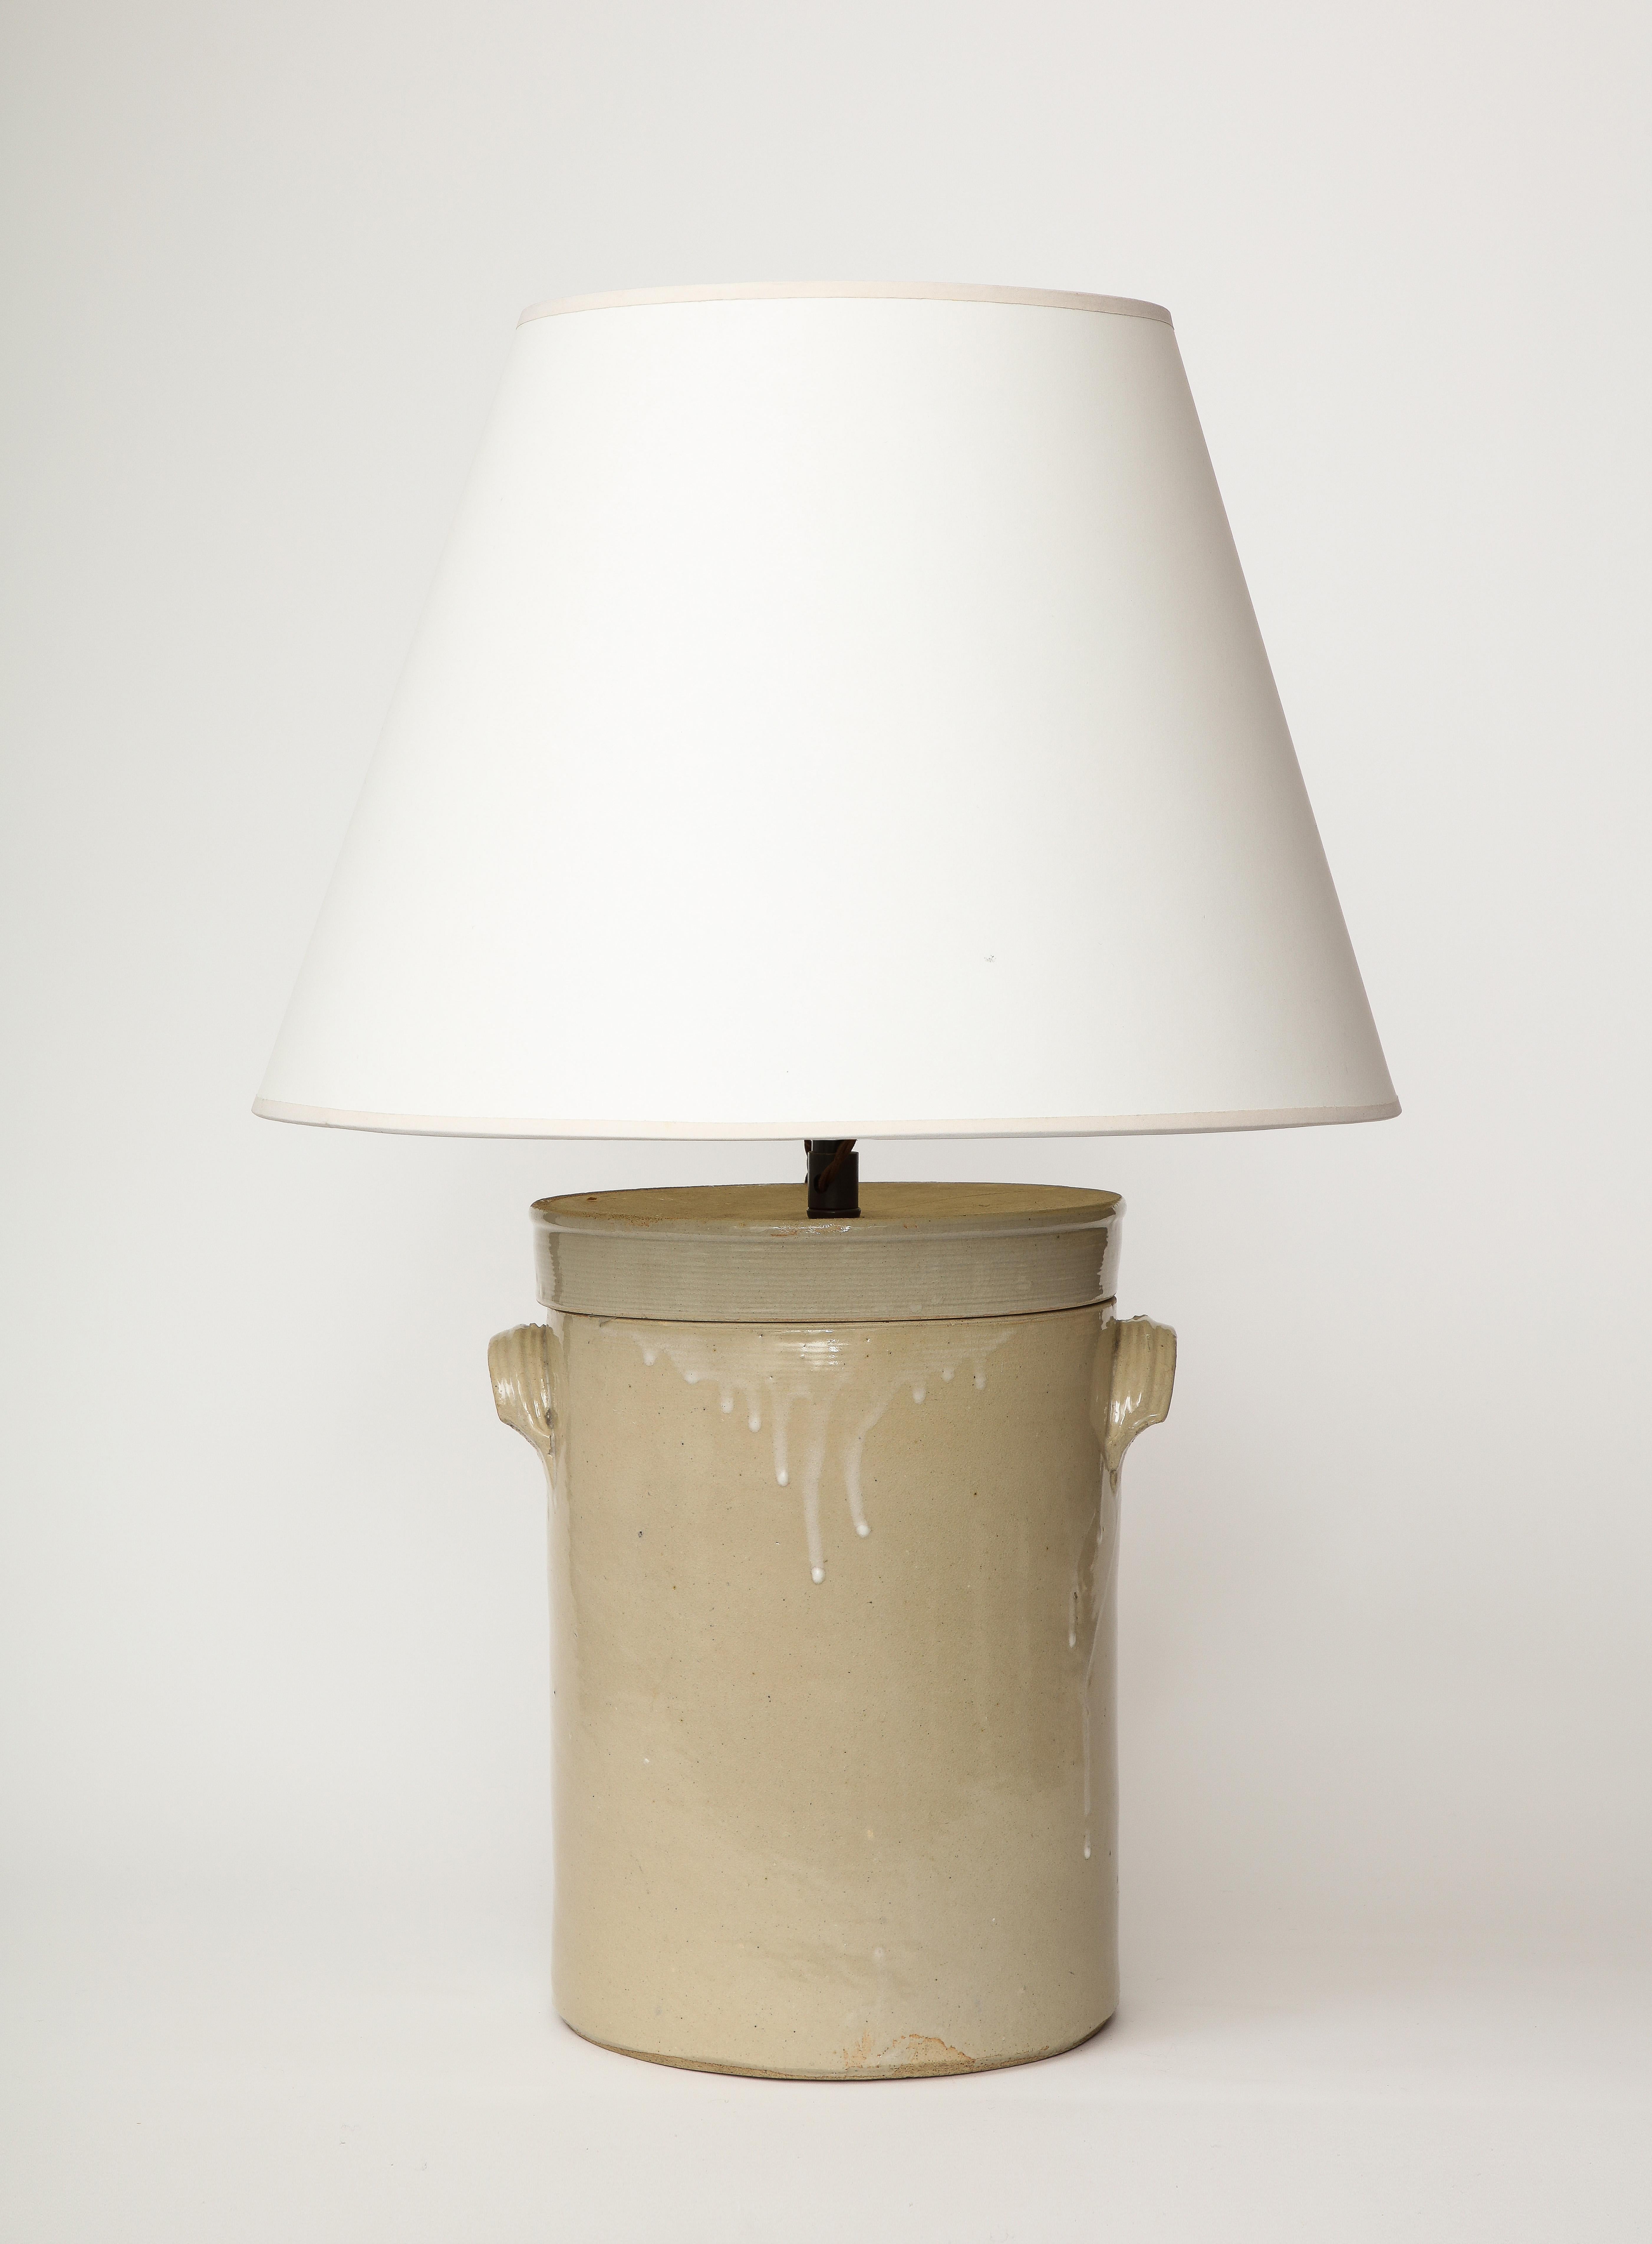 Unique, handmade table lamp, crafted from a 19th Century glazed ceramic butter churn.

This table lamp was recently rewired with a black twisted silk cord, bronze hardware, a dimmer at the neck, and an adjustable shade harp.

Overall Height: